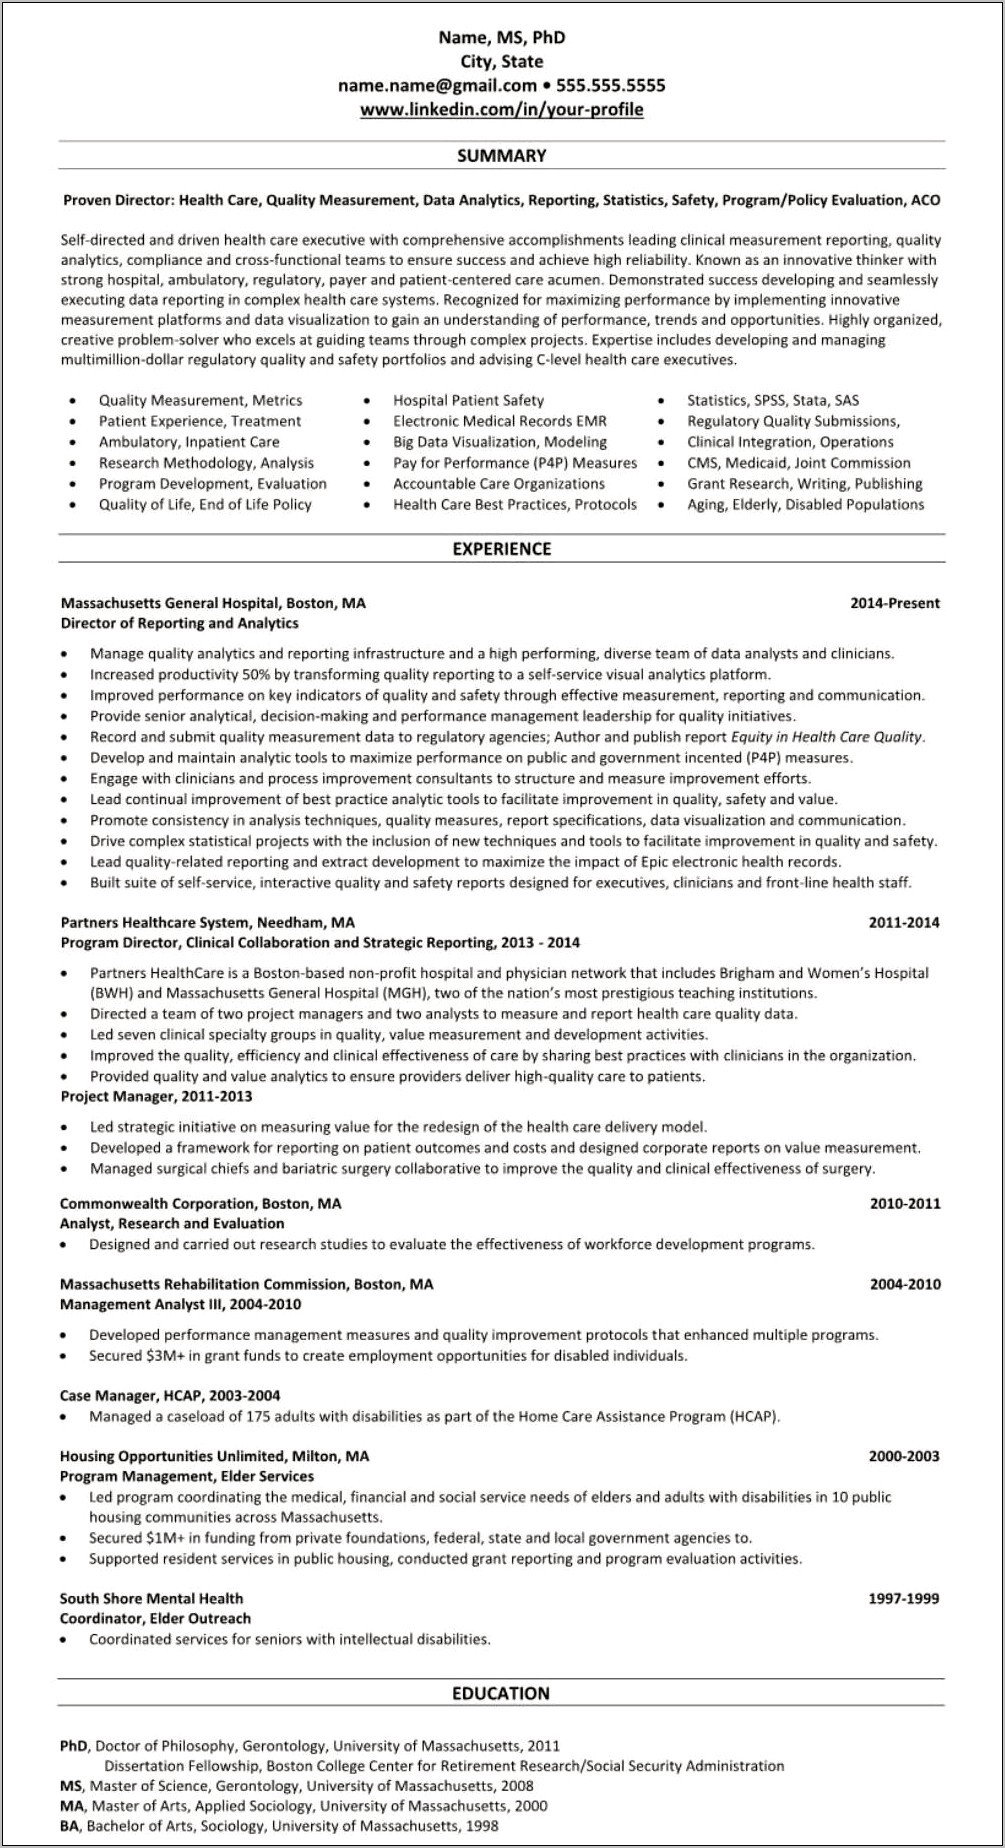 Sample Resume For Disabled Person